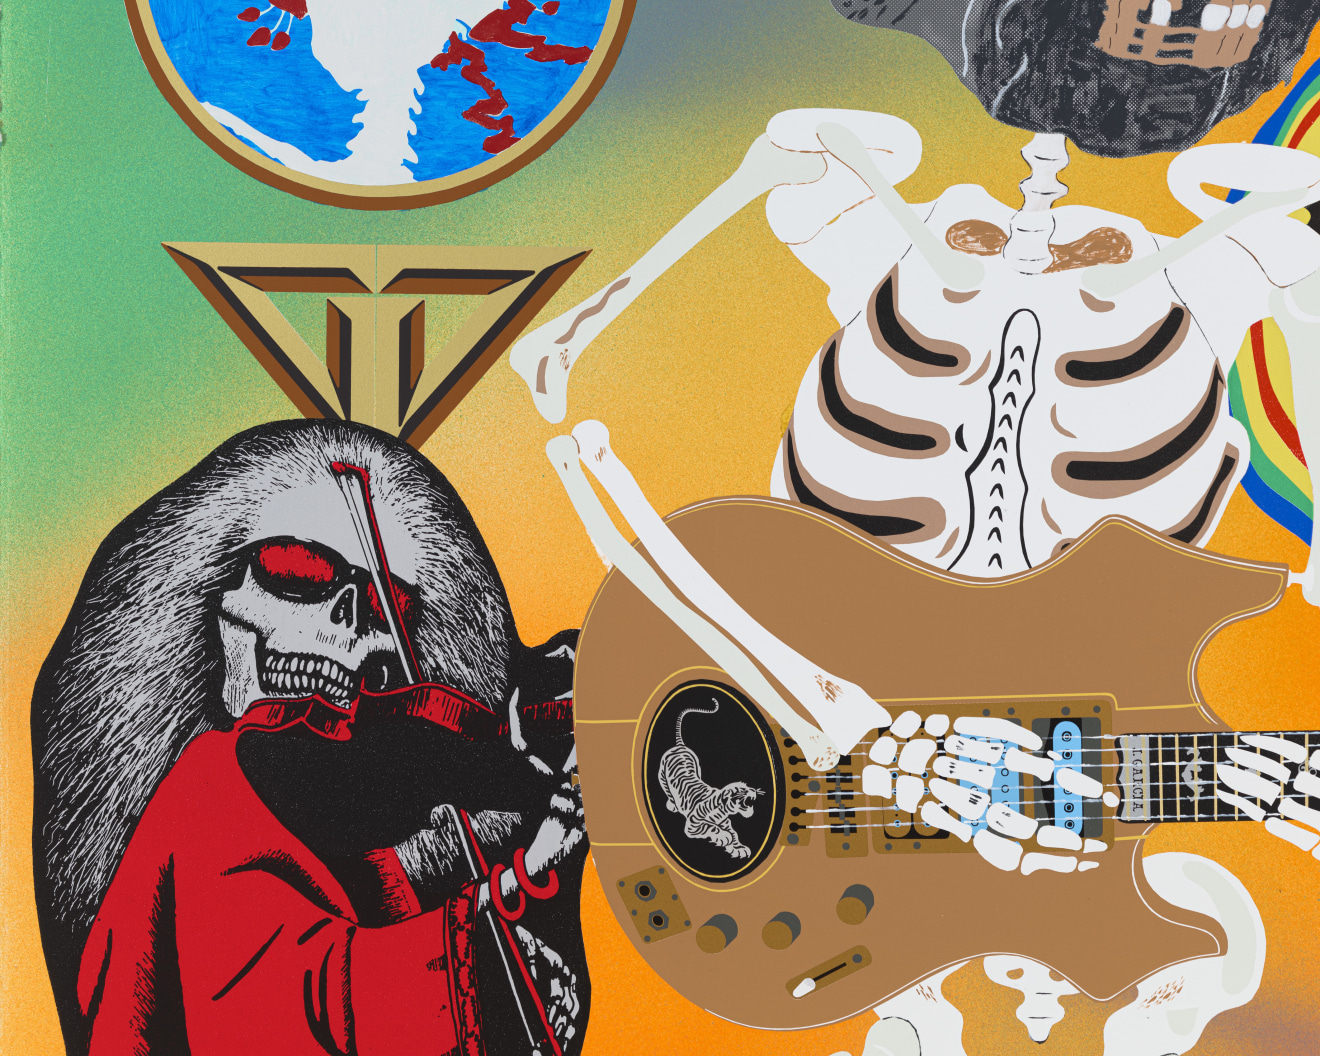 Matthew Brannon, Concerning Nicaragua: On the Road with the Grateful Dead in the 1980s, 2021